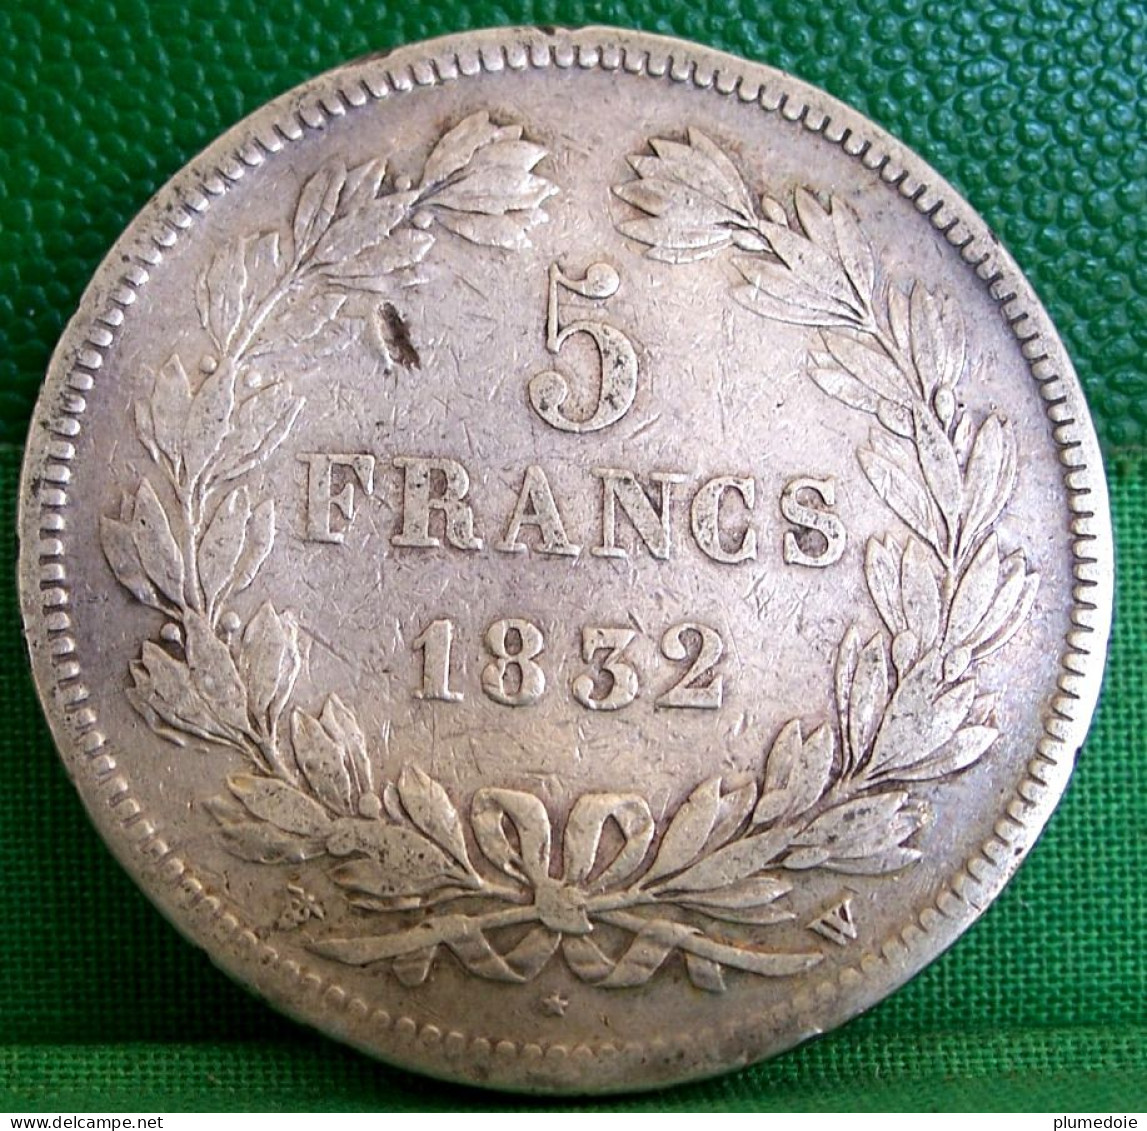 MONNAIE LOUIS PHILIPPE I  , 5 FRANCS 1832 W , LILLE   , Argent , France Old Silver Coin - 5 Francs